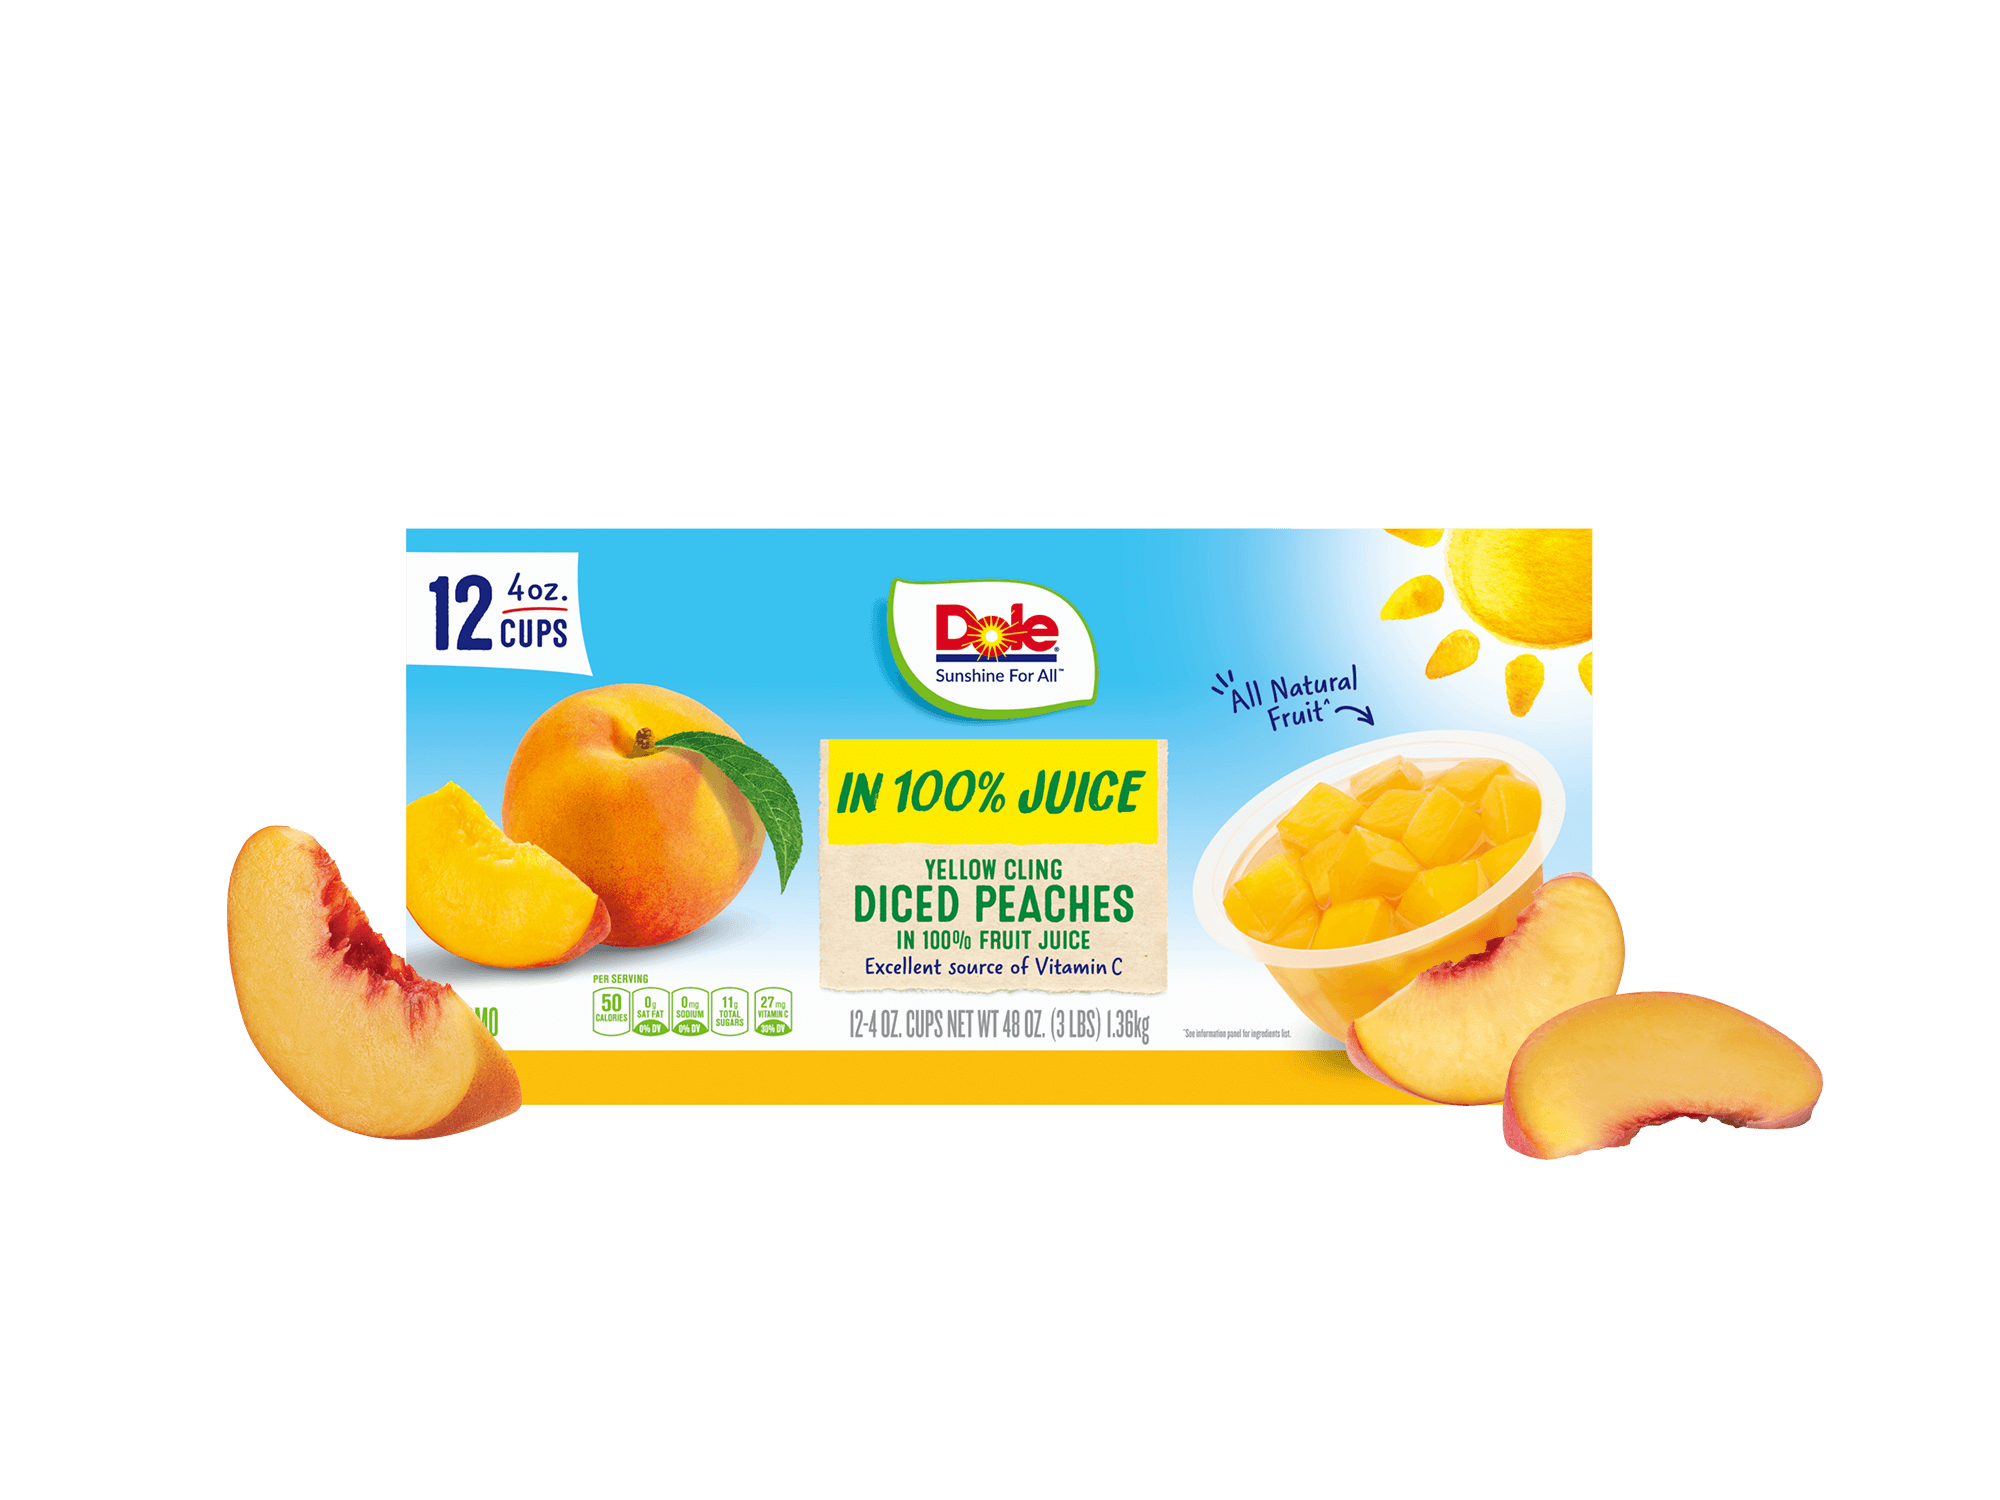 https://dolesunshine.com/wp-content/uploads/sites/2/2022/08/Yellow-Cling-Diced-Peaches-in-100-juice-12ct-Composite.png